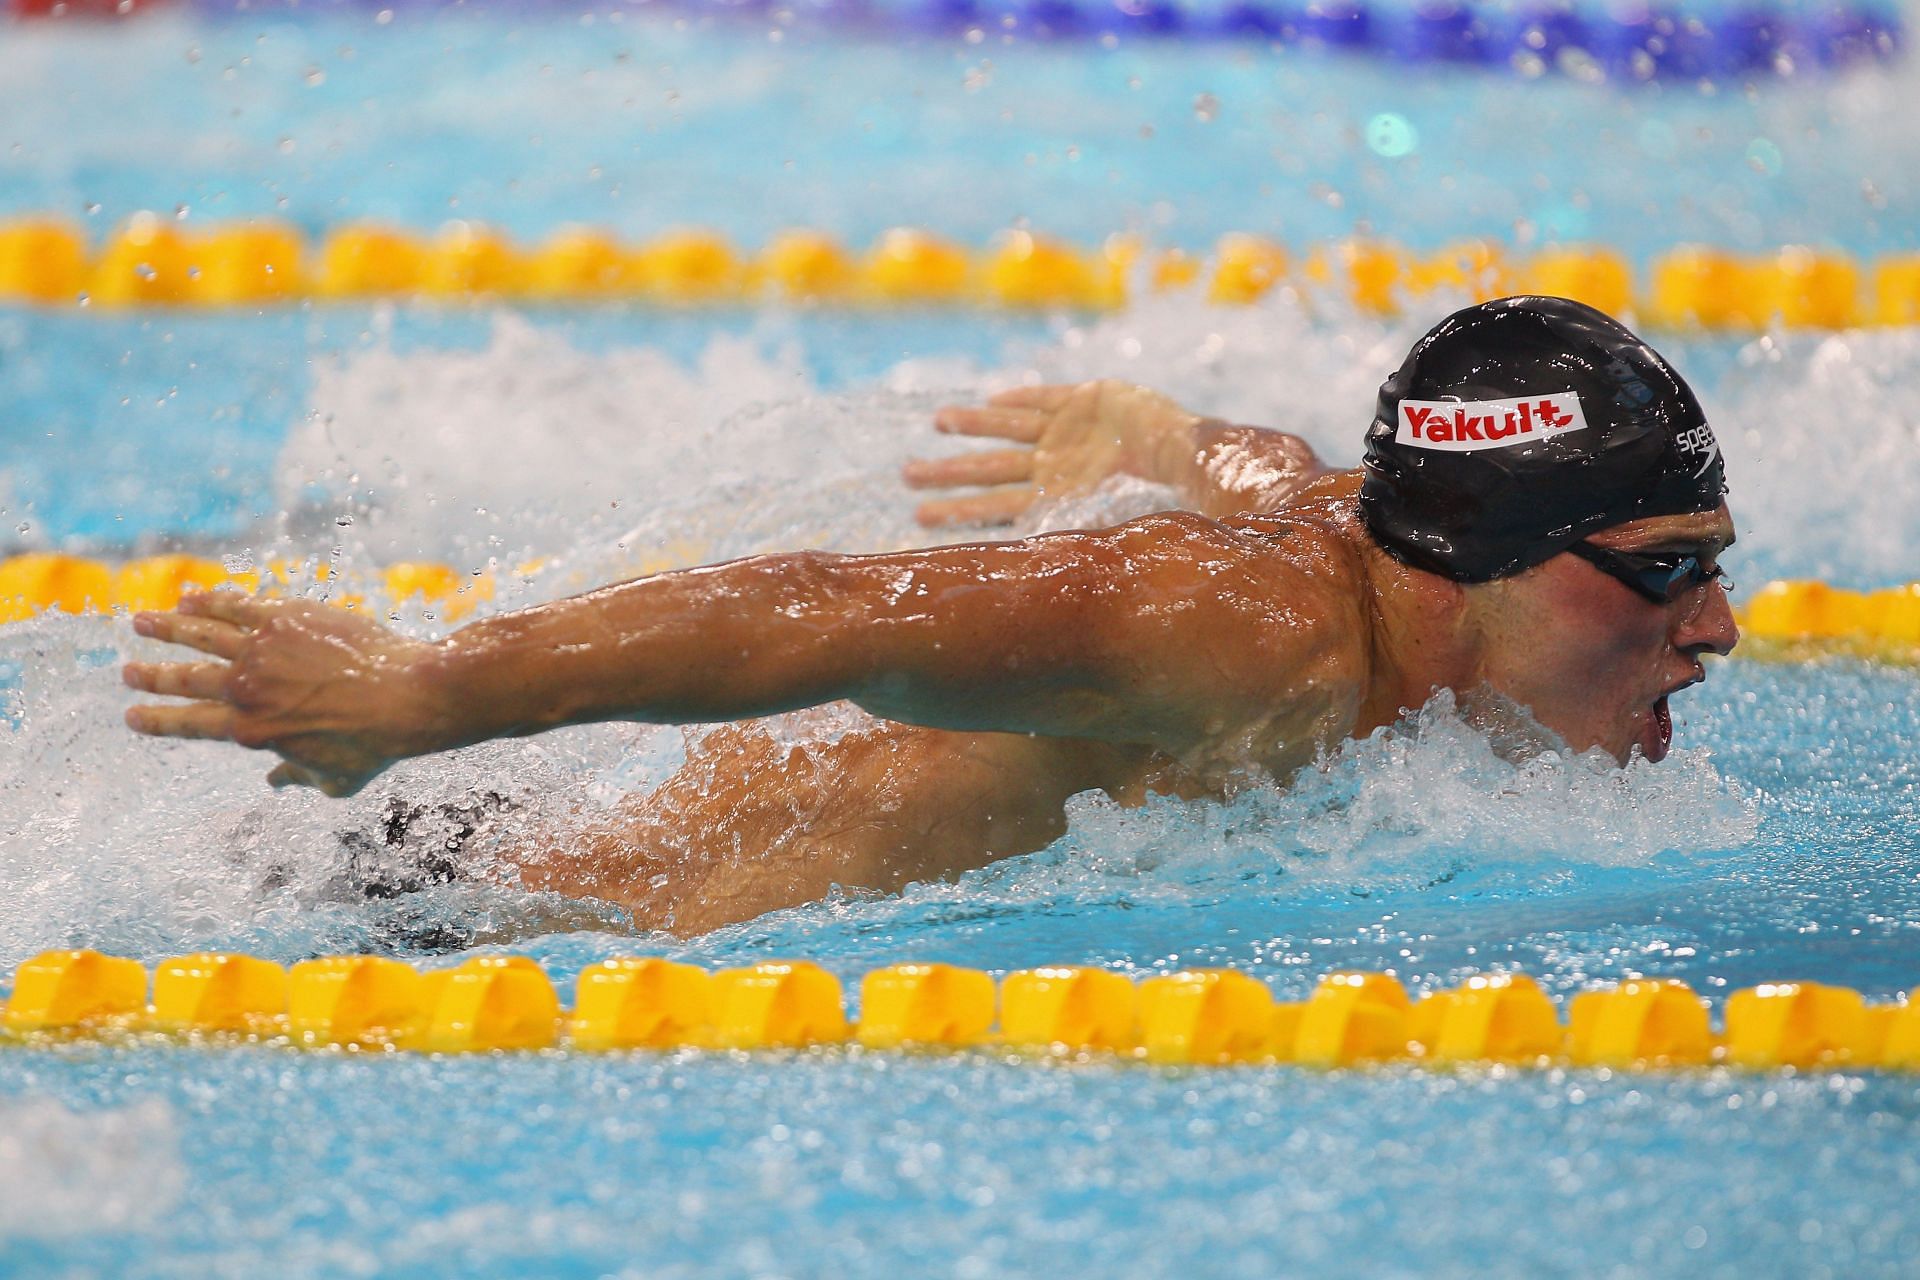 Lochte swims at the 10th FINA World Swimming Championships, 2010 (Photo by Clive Rose/Getty Images)